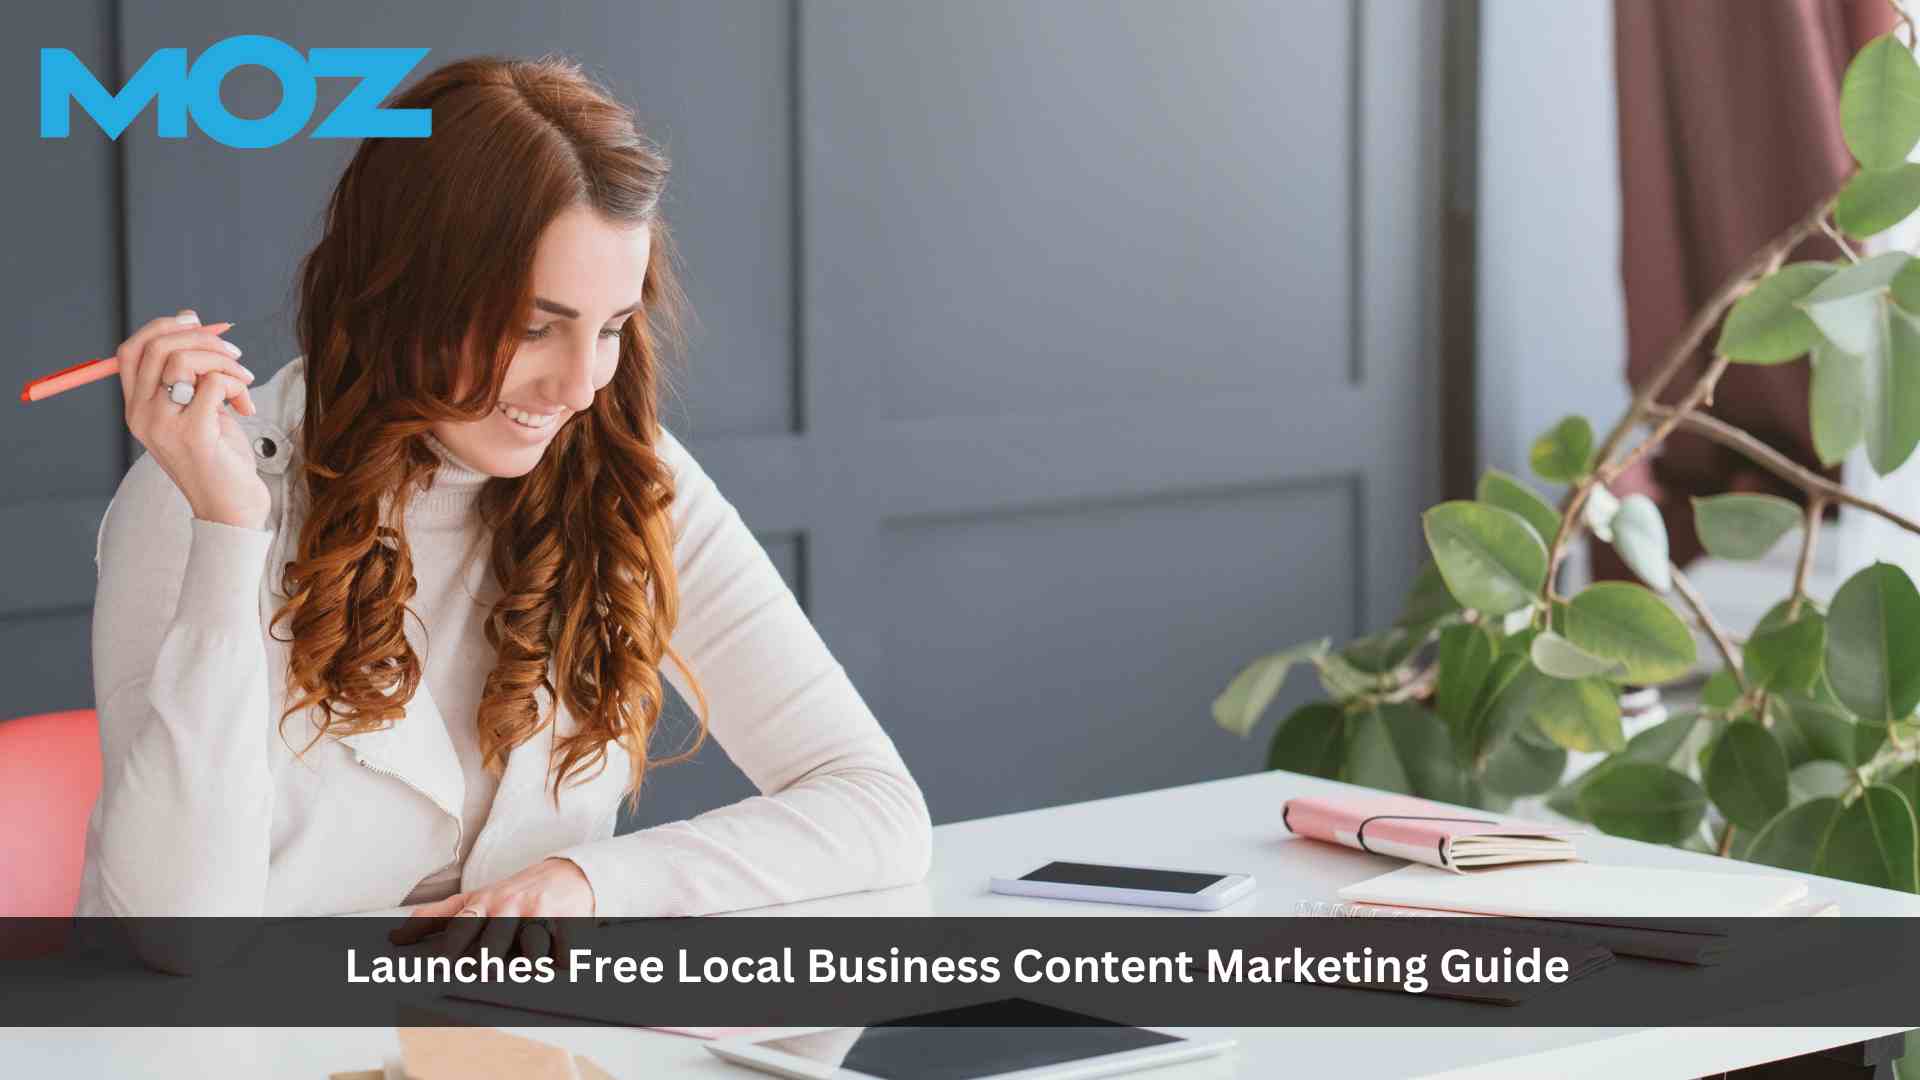 Moz Launches Free Local Business Content Marketing Guide to Empower Local Marketers and Increase Competitive Edge